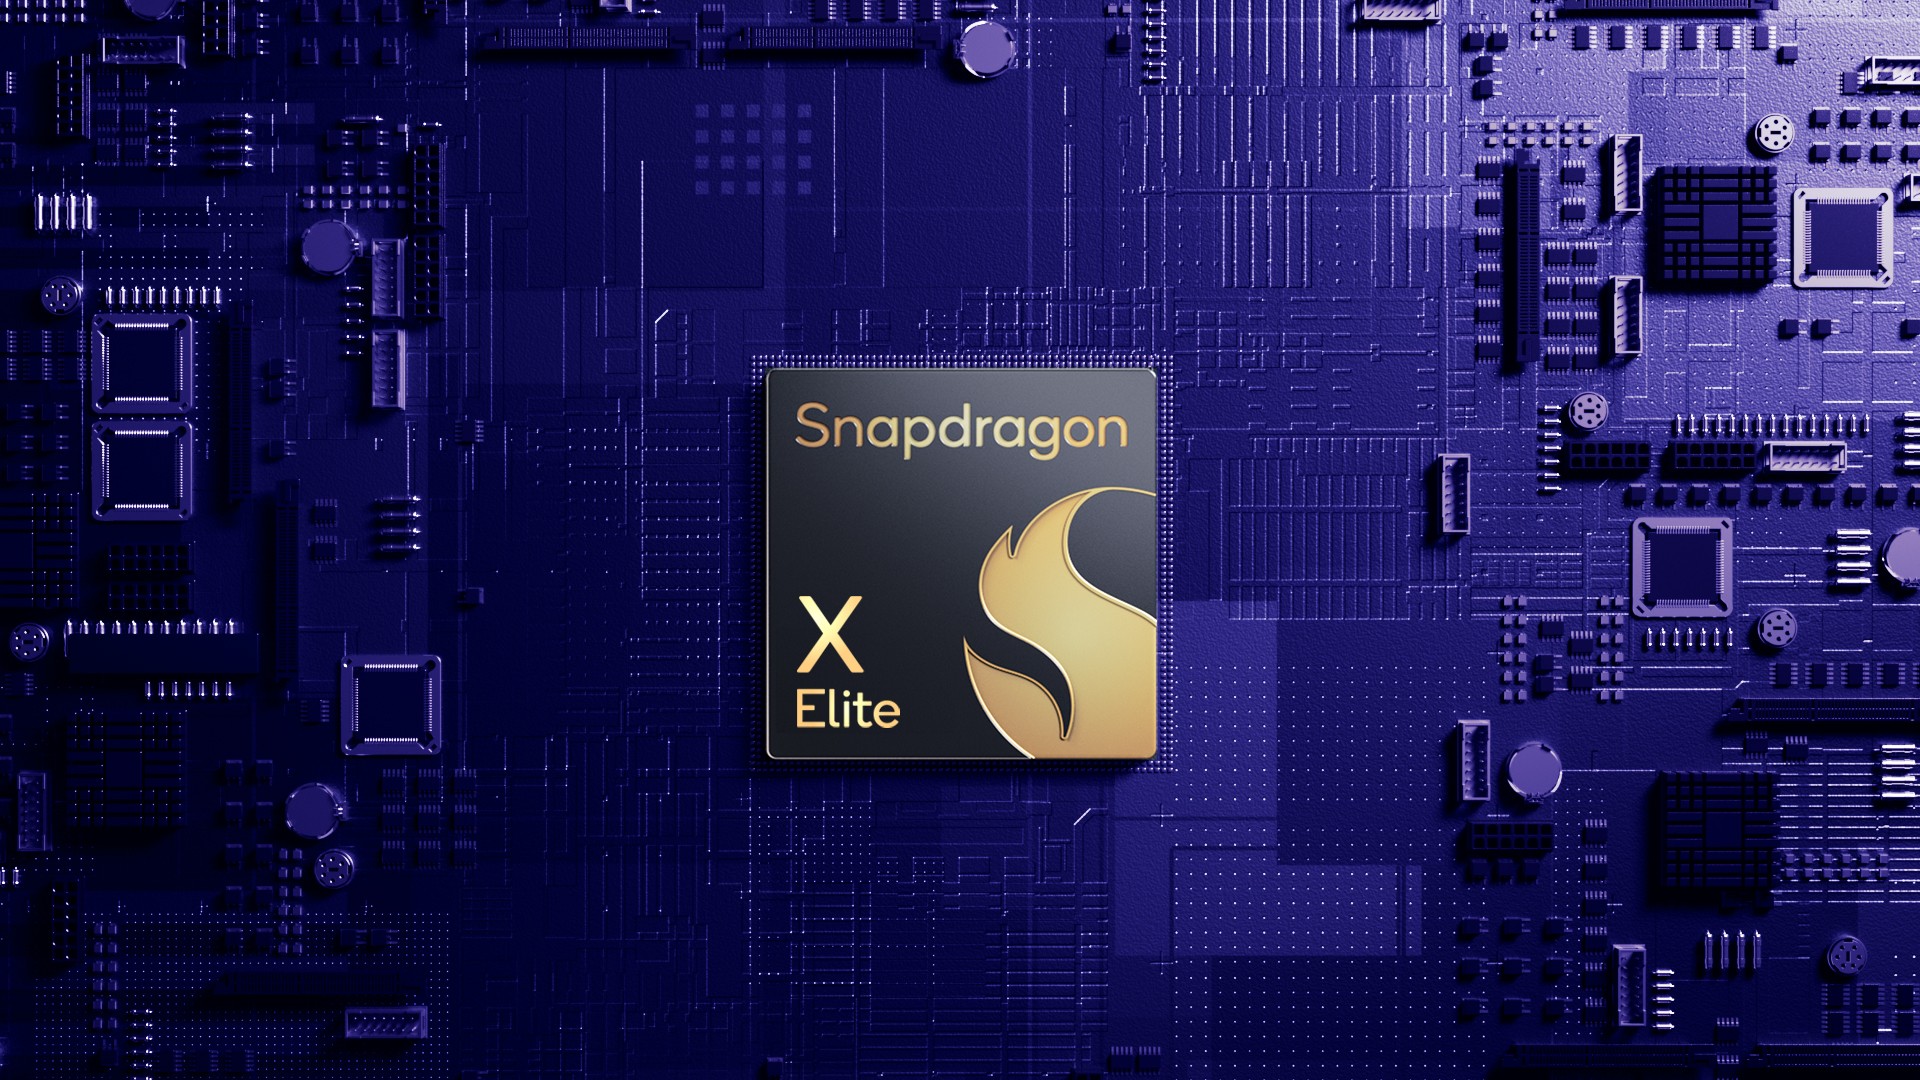 Qualcomm Unveils Snapdragon X Elite: The Most Powerful Chip for Always-Connected PCs